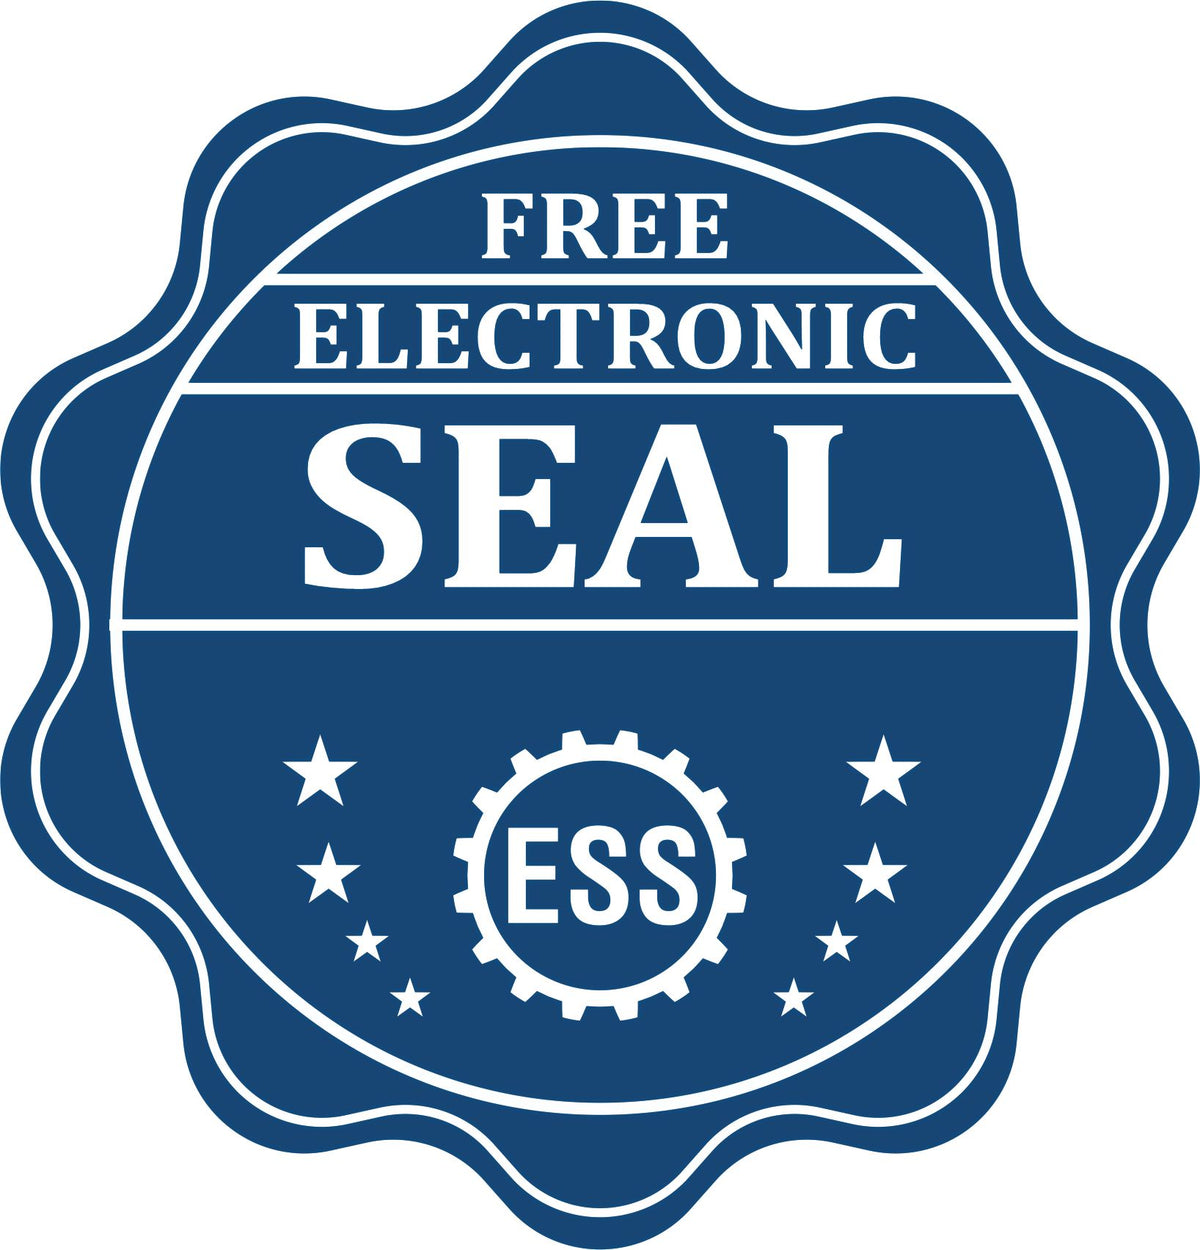 A badge showing a free electronic seal for the New Jersey Professional Engineer Seal Stamp with stars and the ESS gear on the emblem.